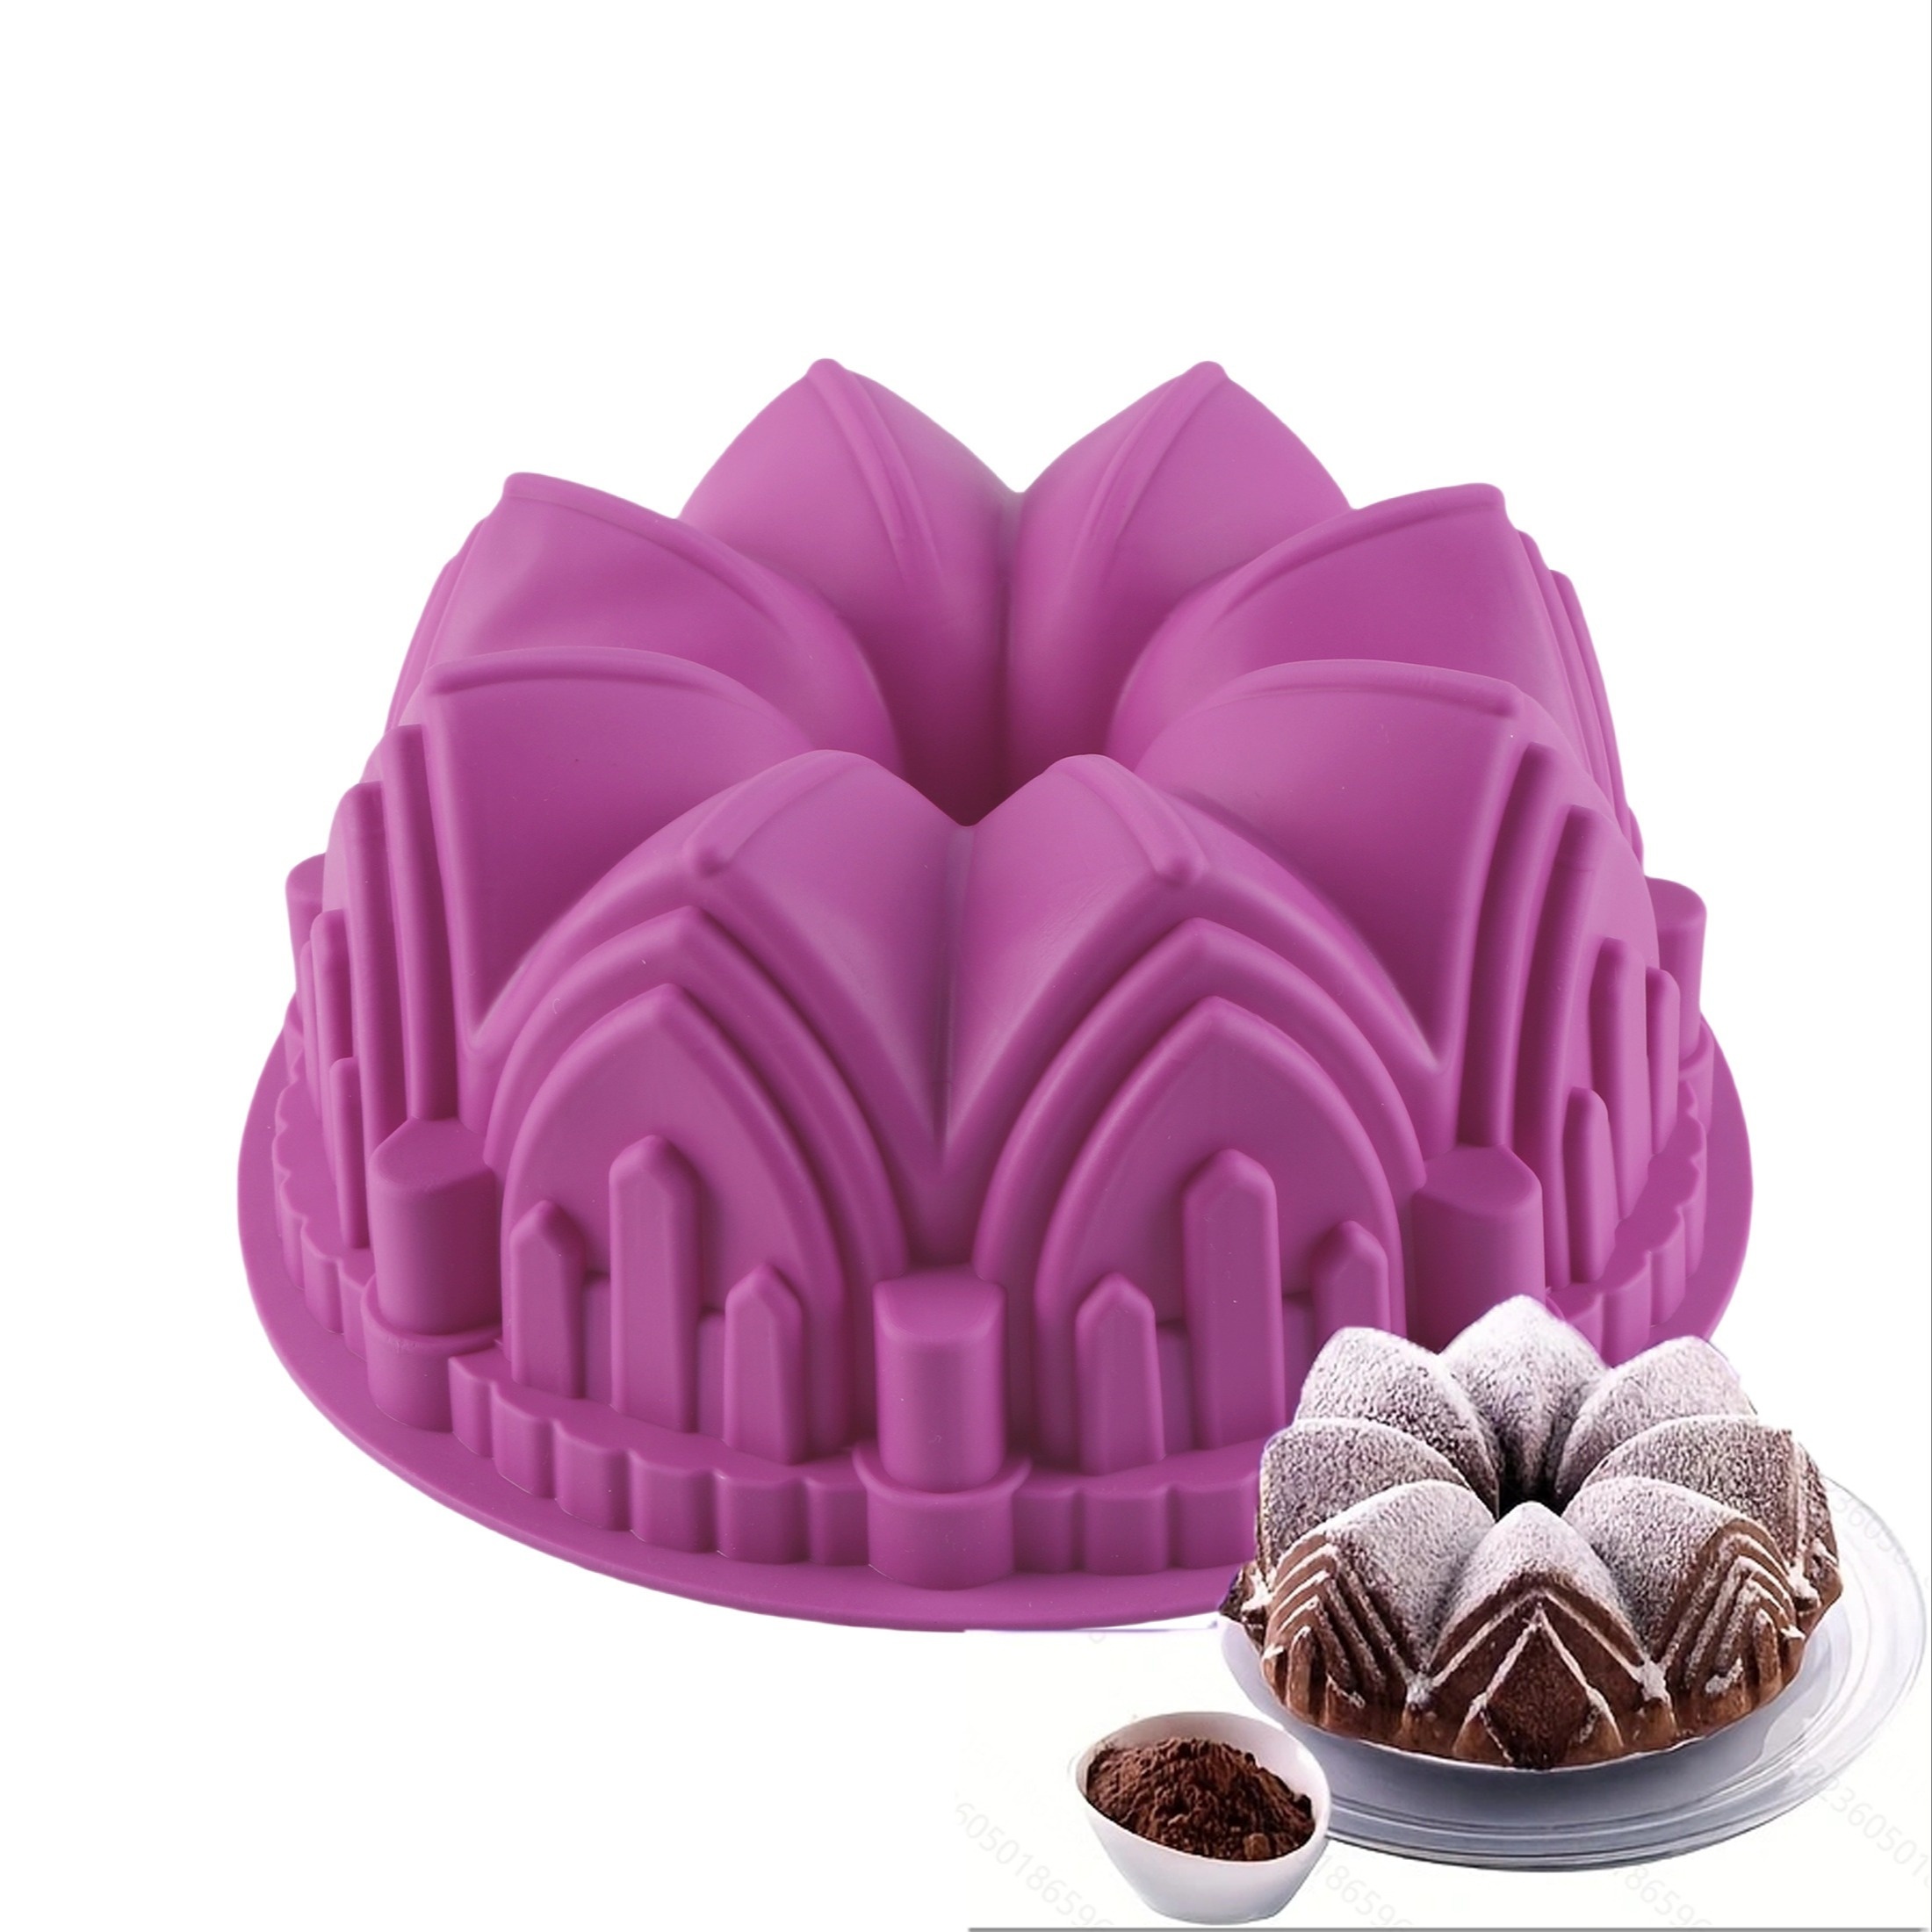 

1pc Large Castle Cake Pan 8.54''x3.35'' Silicone Cake Mold Flower Crown Shaped Bread Toast Baking Mould Diy Homemade Cake Making Bakeware